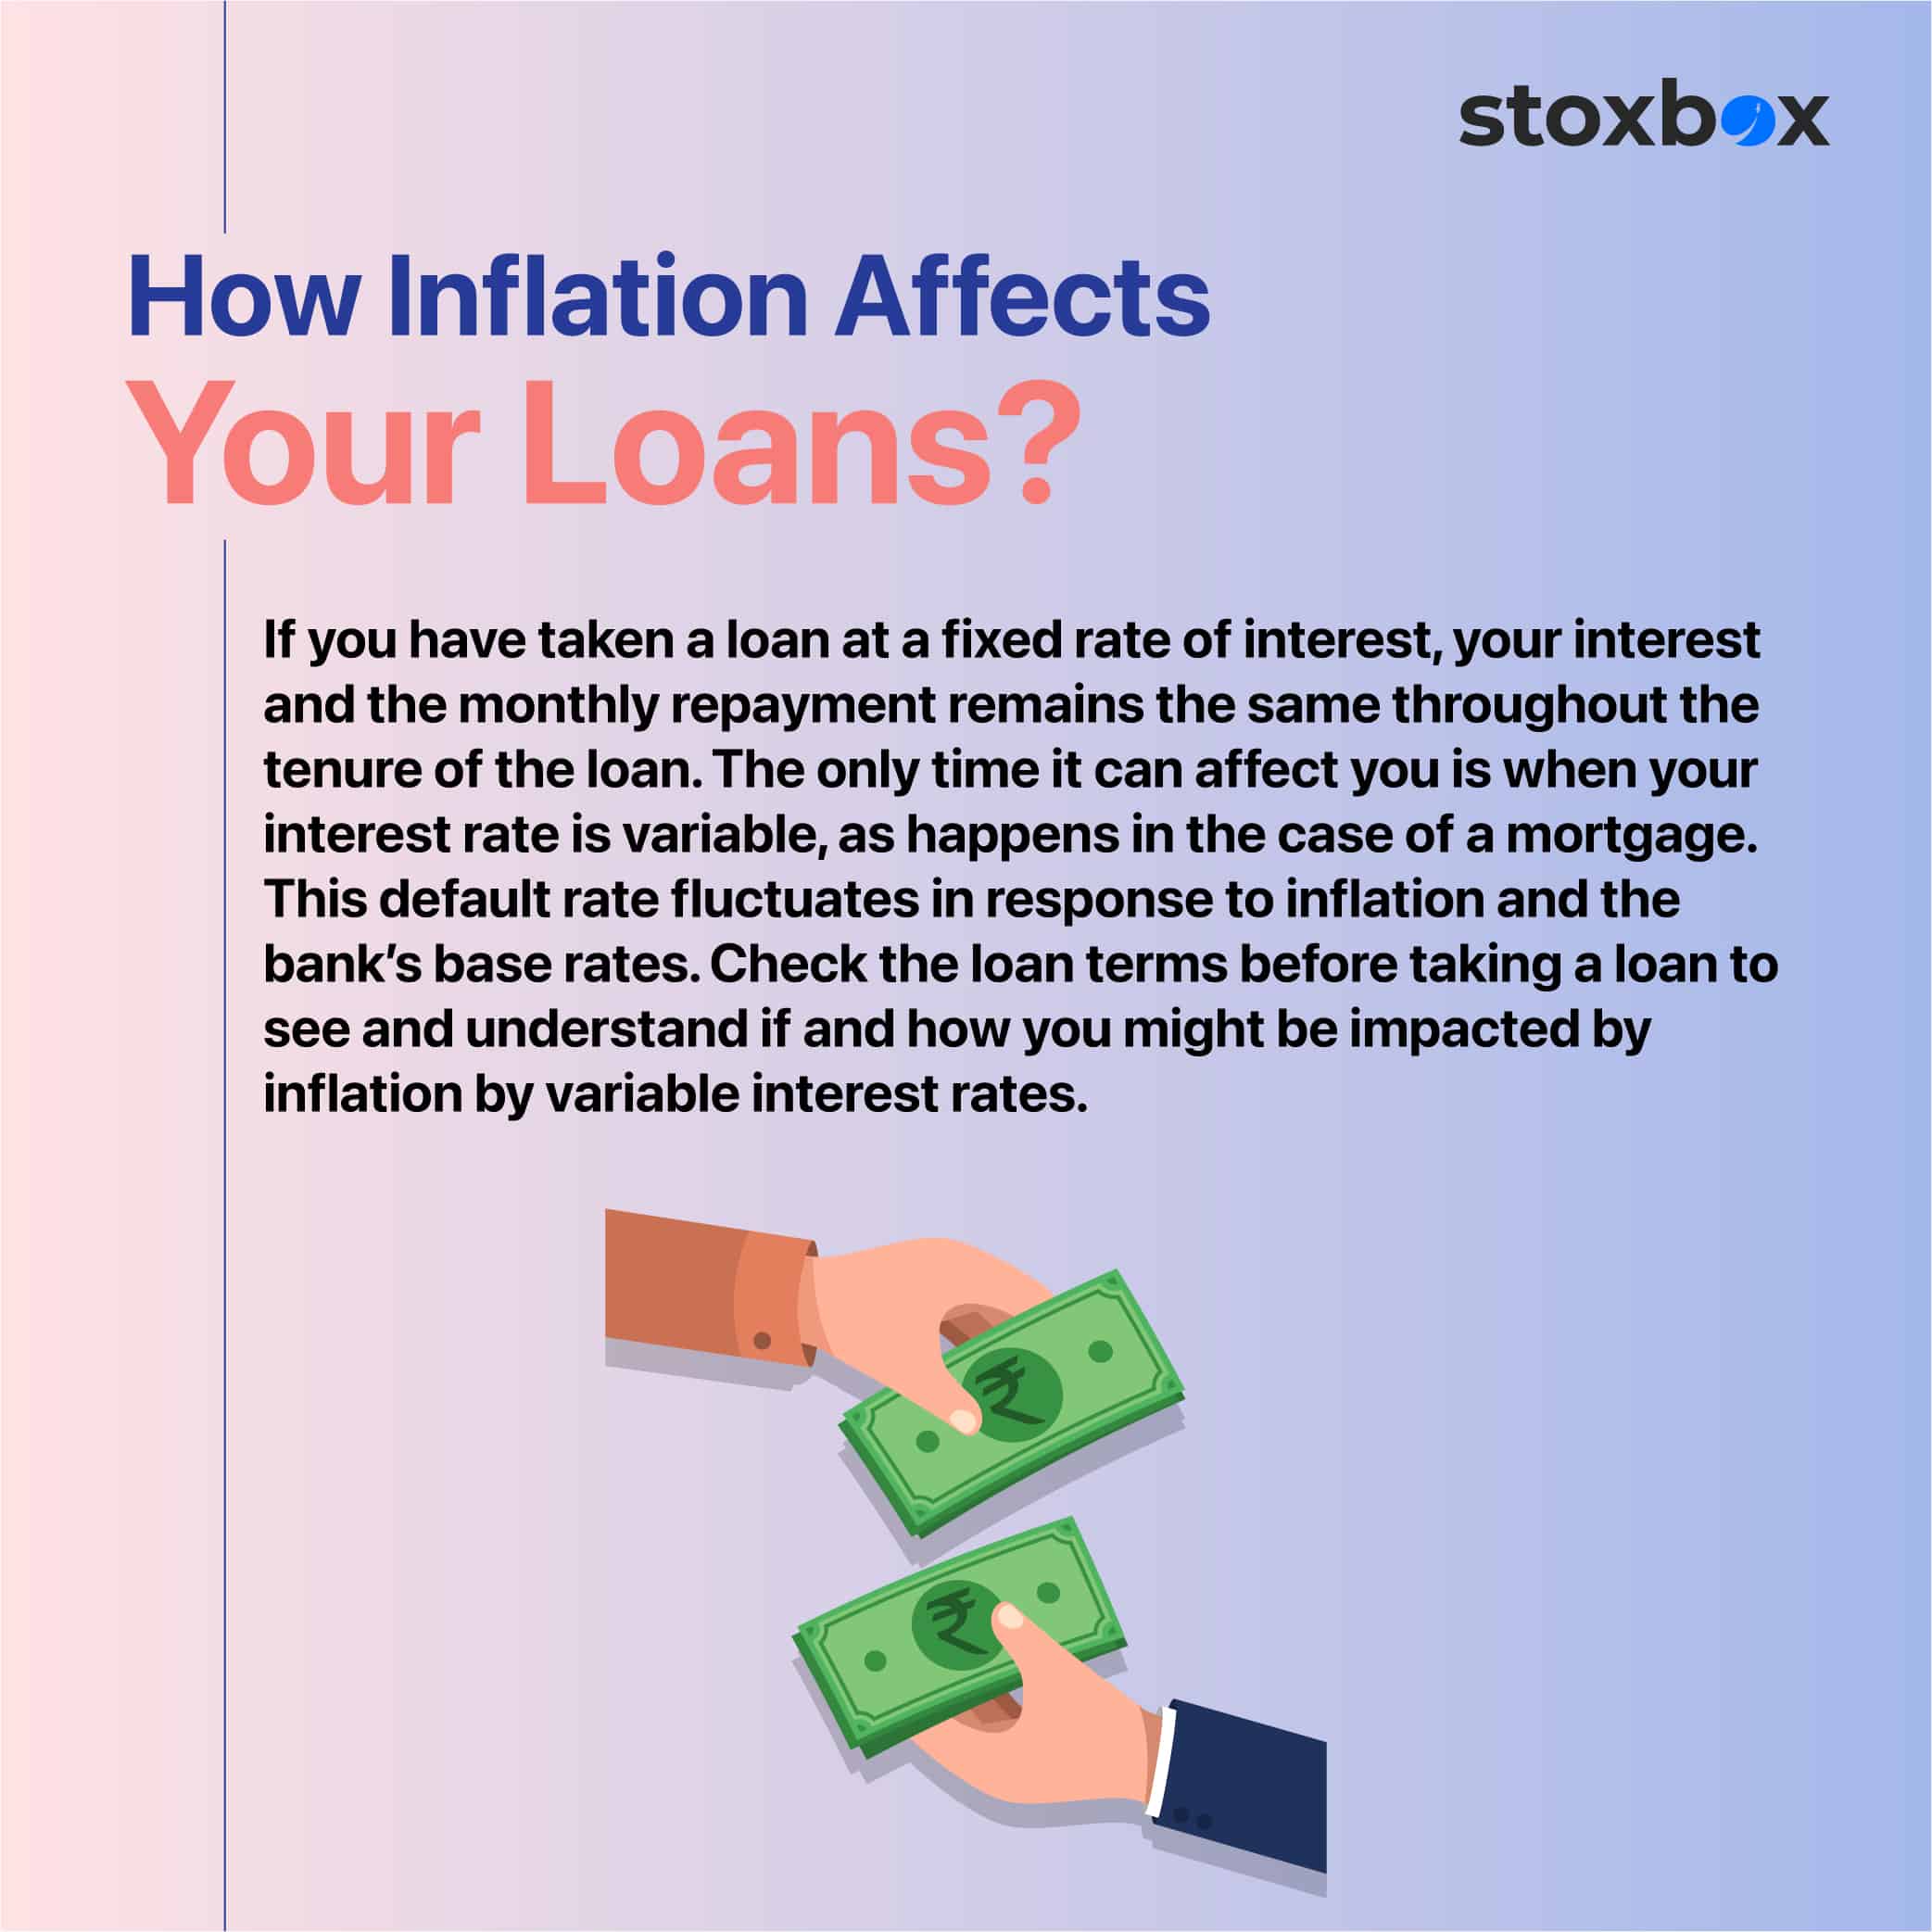 How Inflation Affects Interest Rates